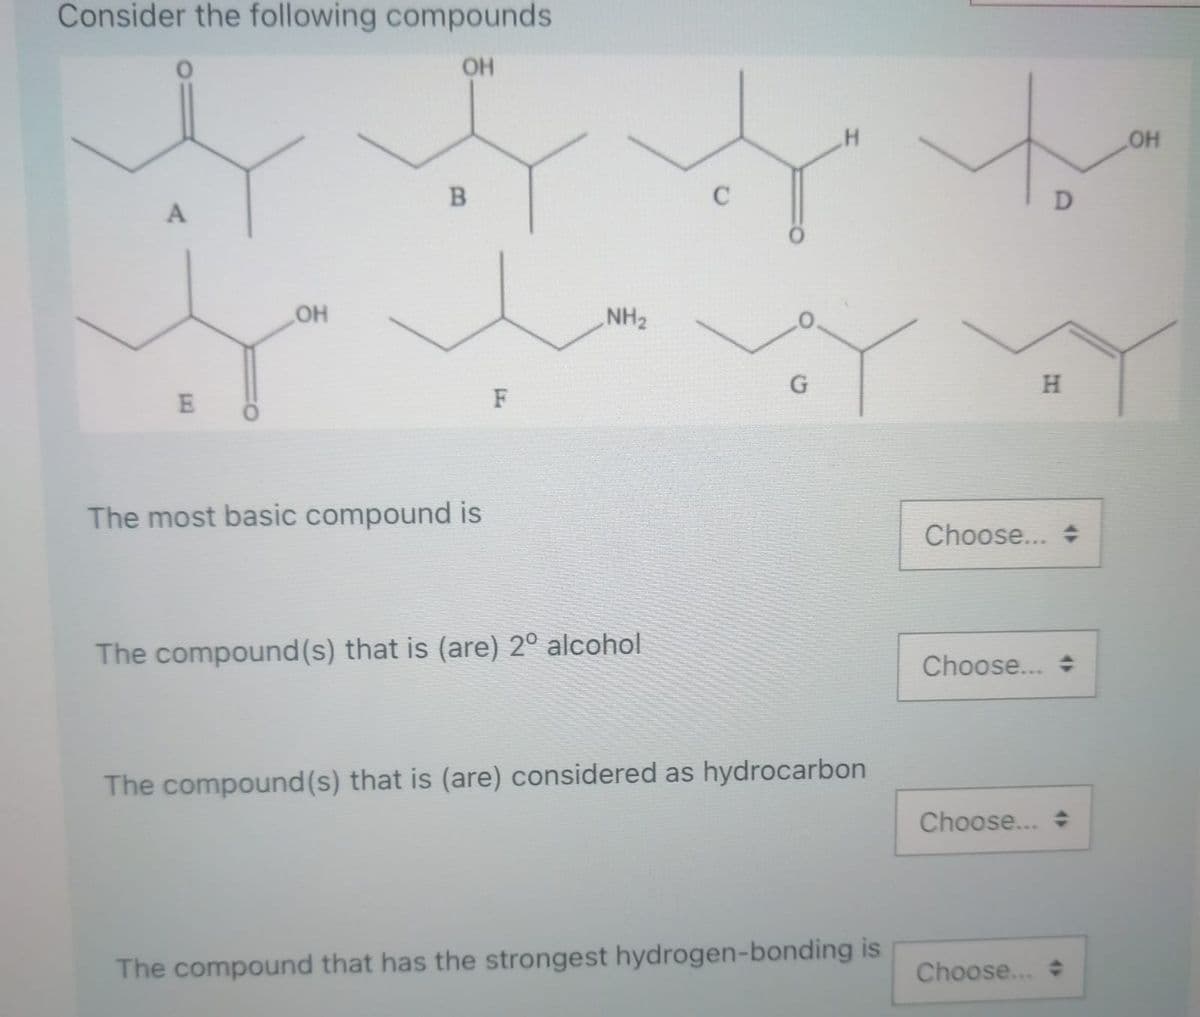 Consider the following compounds
OH
OH
D
A
NH2
H
E
F
The most basic compound is
Choose... +
The compound(s) that is (are) 2º alcohol
Choose... +
The compound(s) that is (are) considered as hydrocarbon
Choose...
The compound that has the strongest hydrogen-bonding is
Choose...
